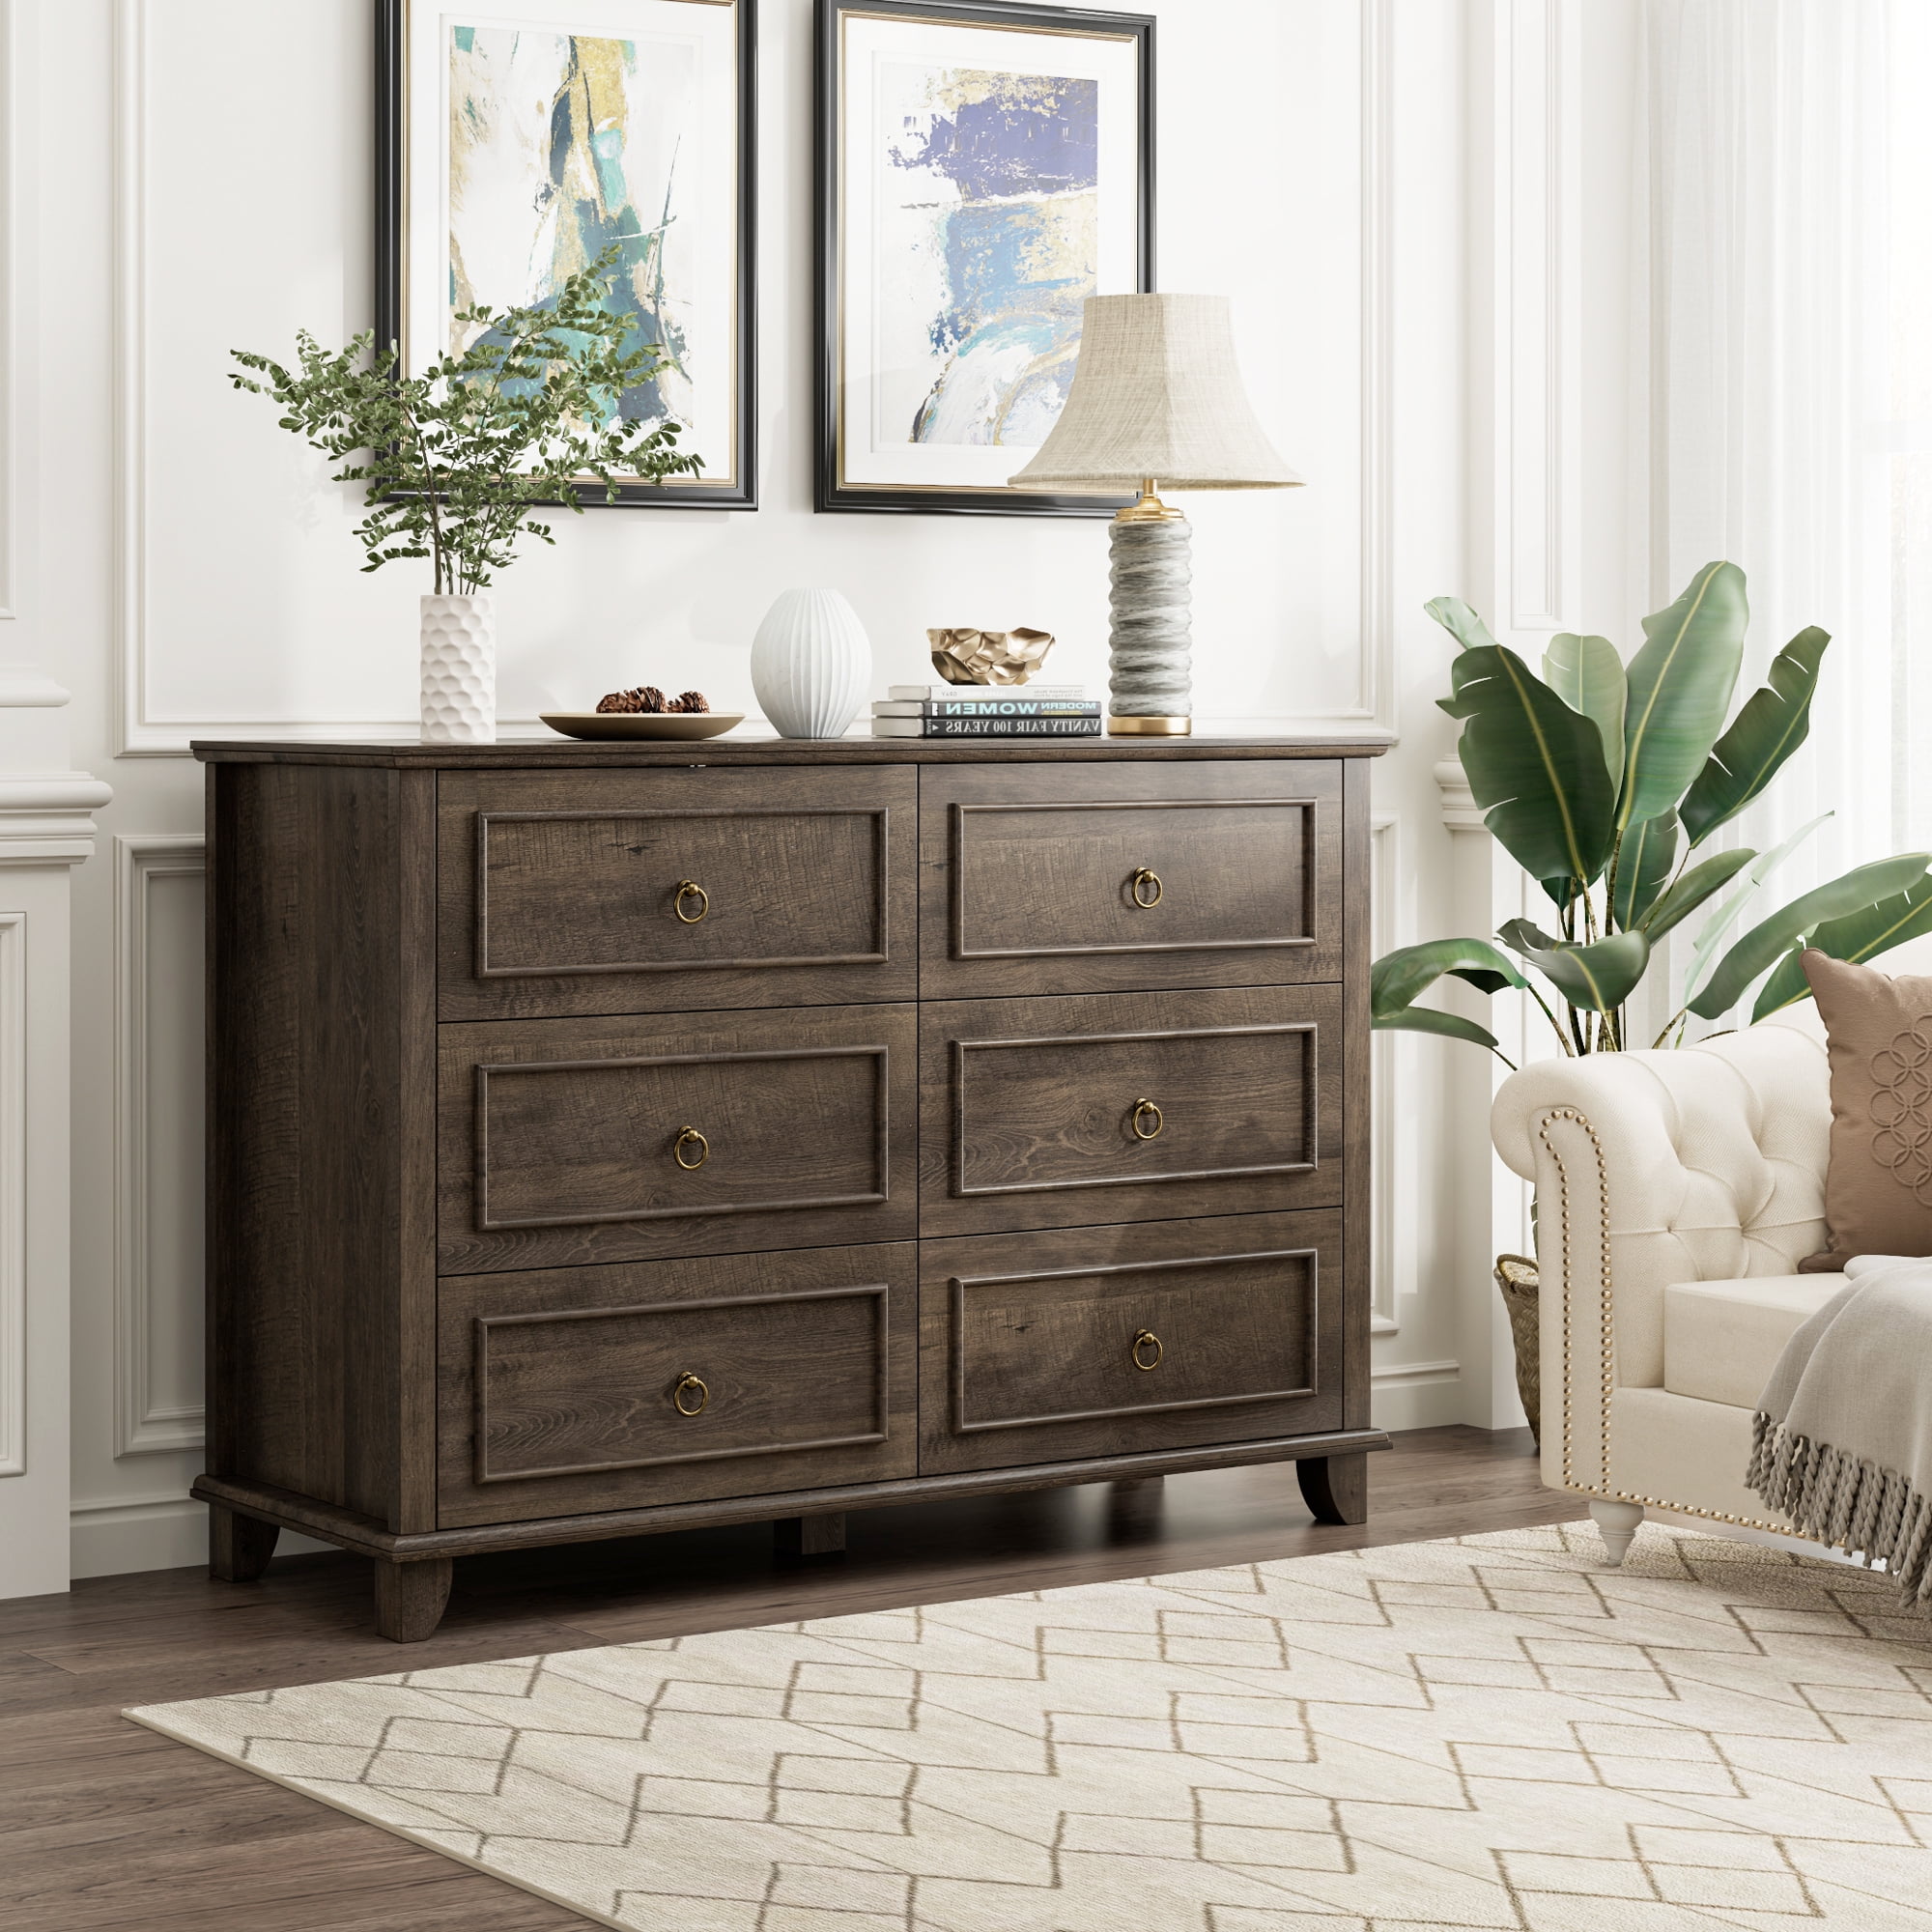 Homfa Double Dresser with 6 Drawers, 47'' Wide Chest of Drawers for ...